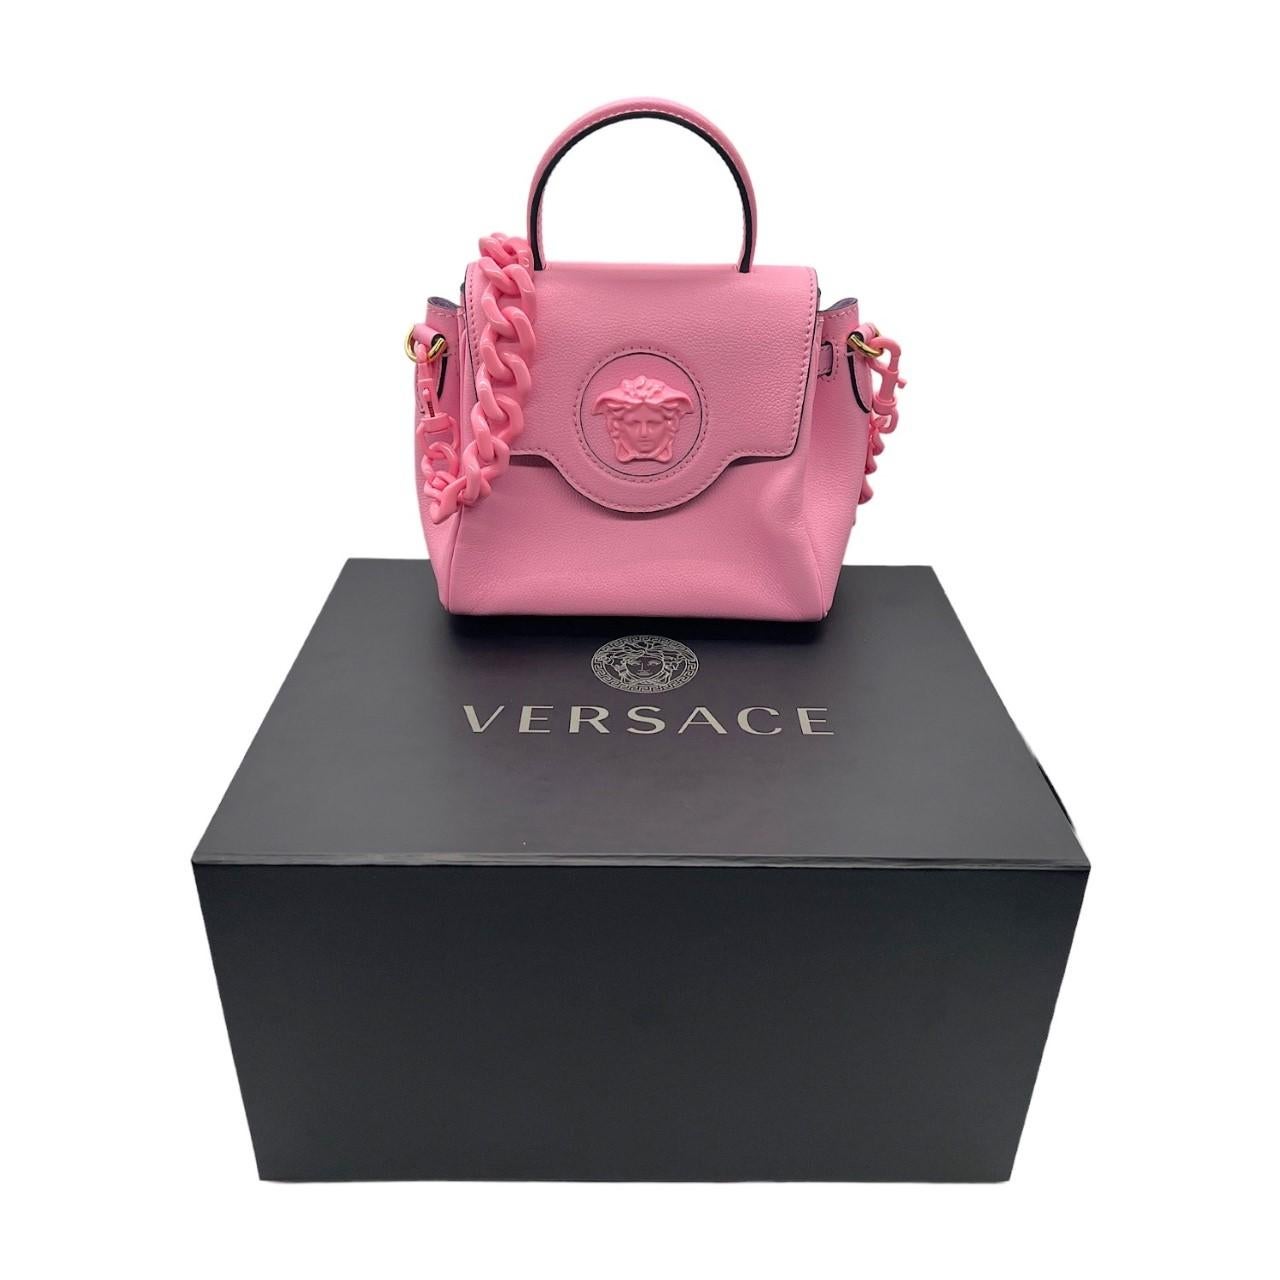 We are offering this beautiful Versace handbag. Crafted in Italy, made with pink leather and gold-tone hardware. It features the classic Versace Medusa head and a removeable chain shoulder strap in pink. It has a top handle with a magnetic fold-over